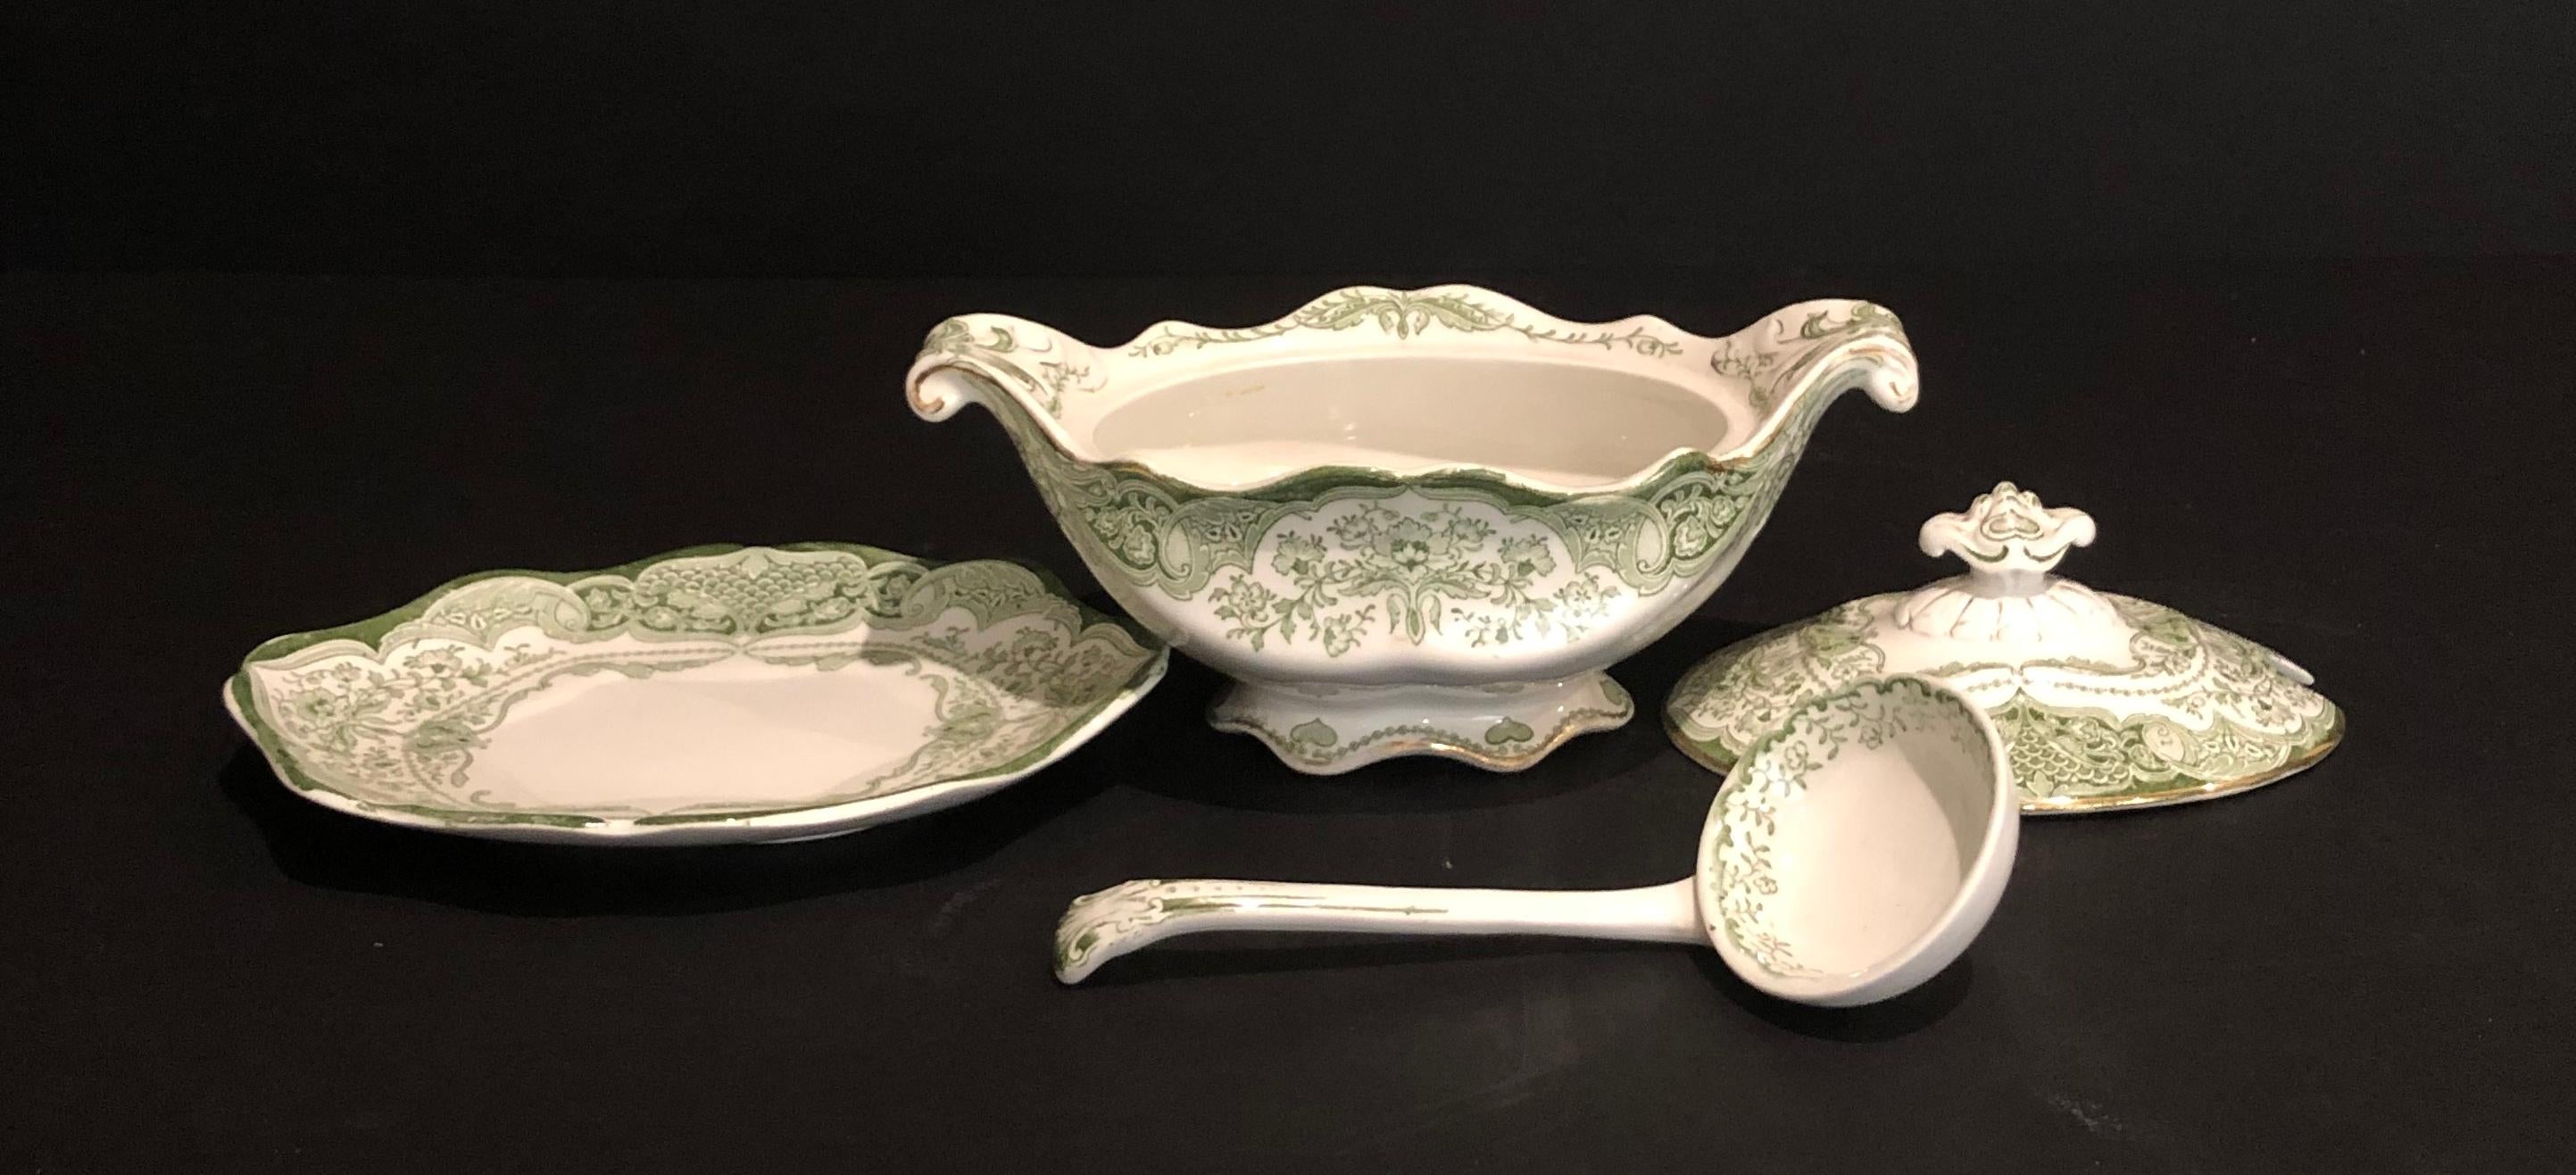 19th century antique ceramic continental green and white 4-piece gravy boat. Includes sauce boat, sauce ladle and under dish.
 